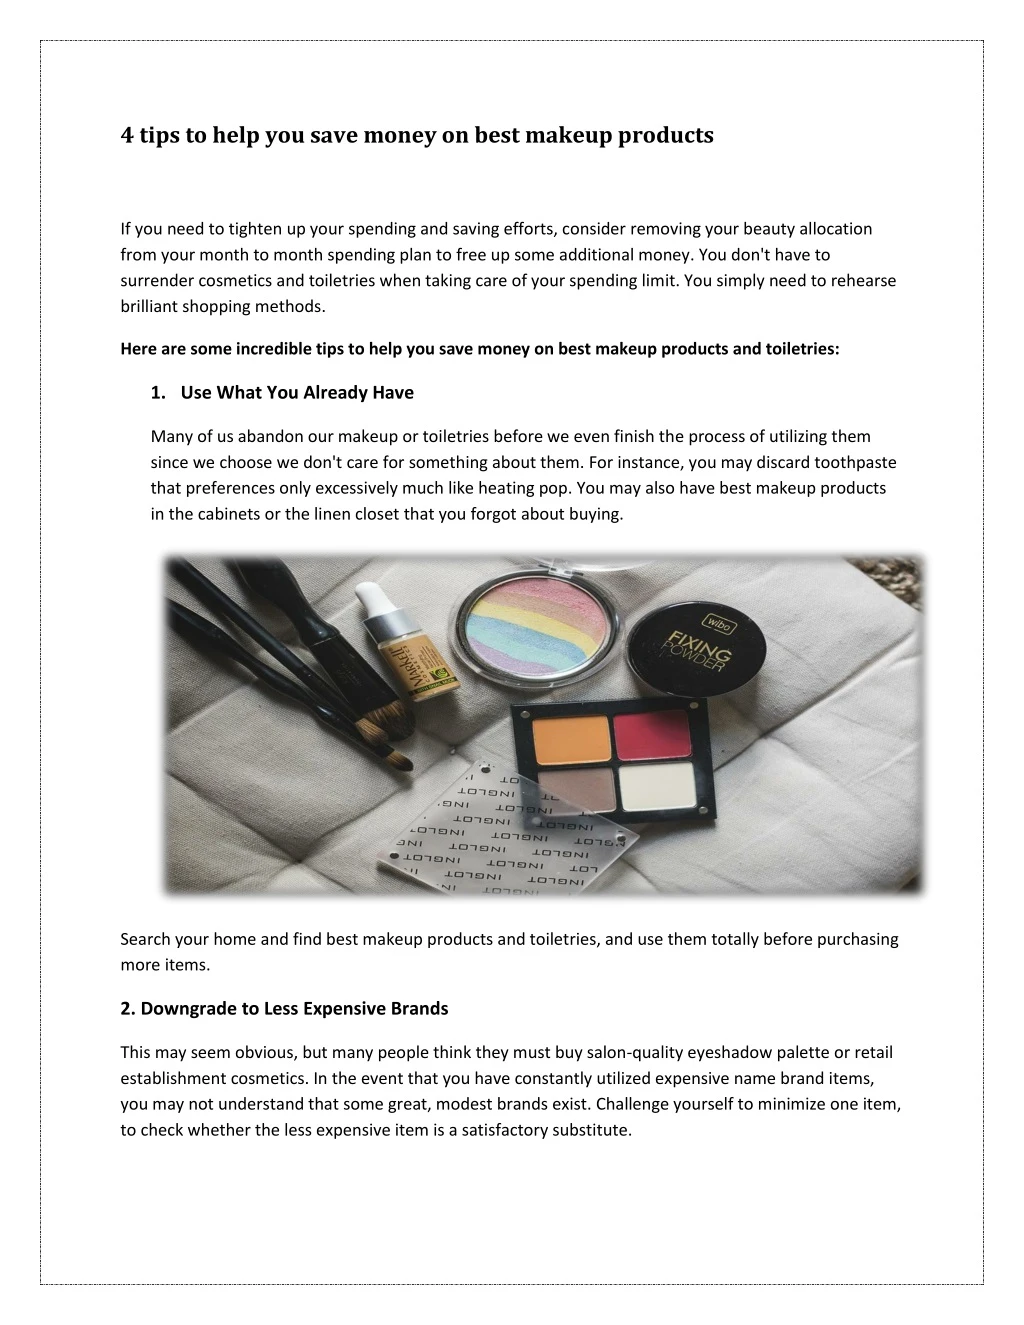 4 tips to help you save money on best makeup